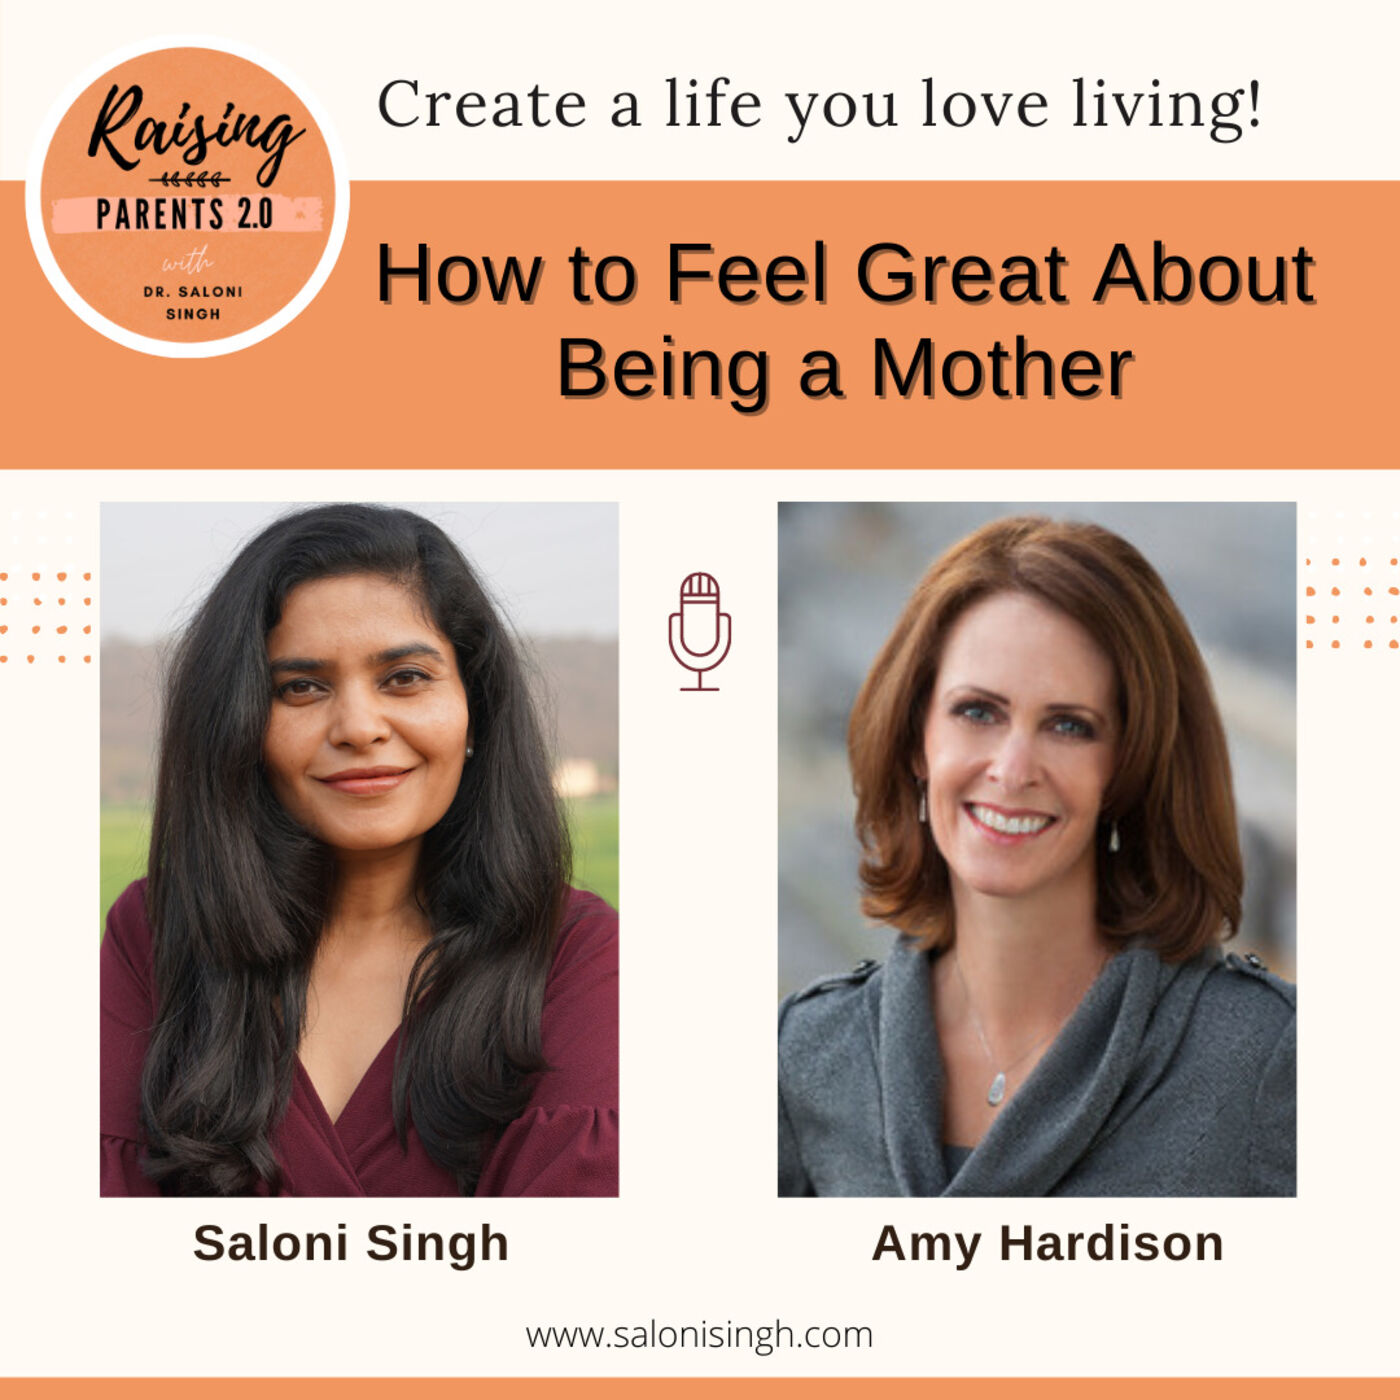 'How to Feel Great About Being a Mother' Saloni Singh with Amy Hardison